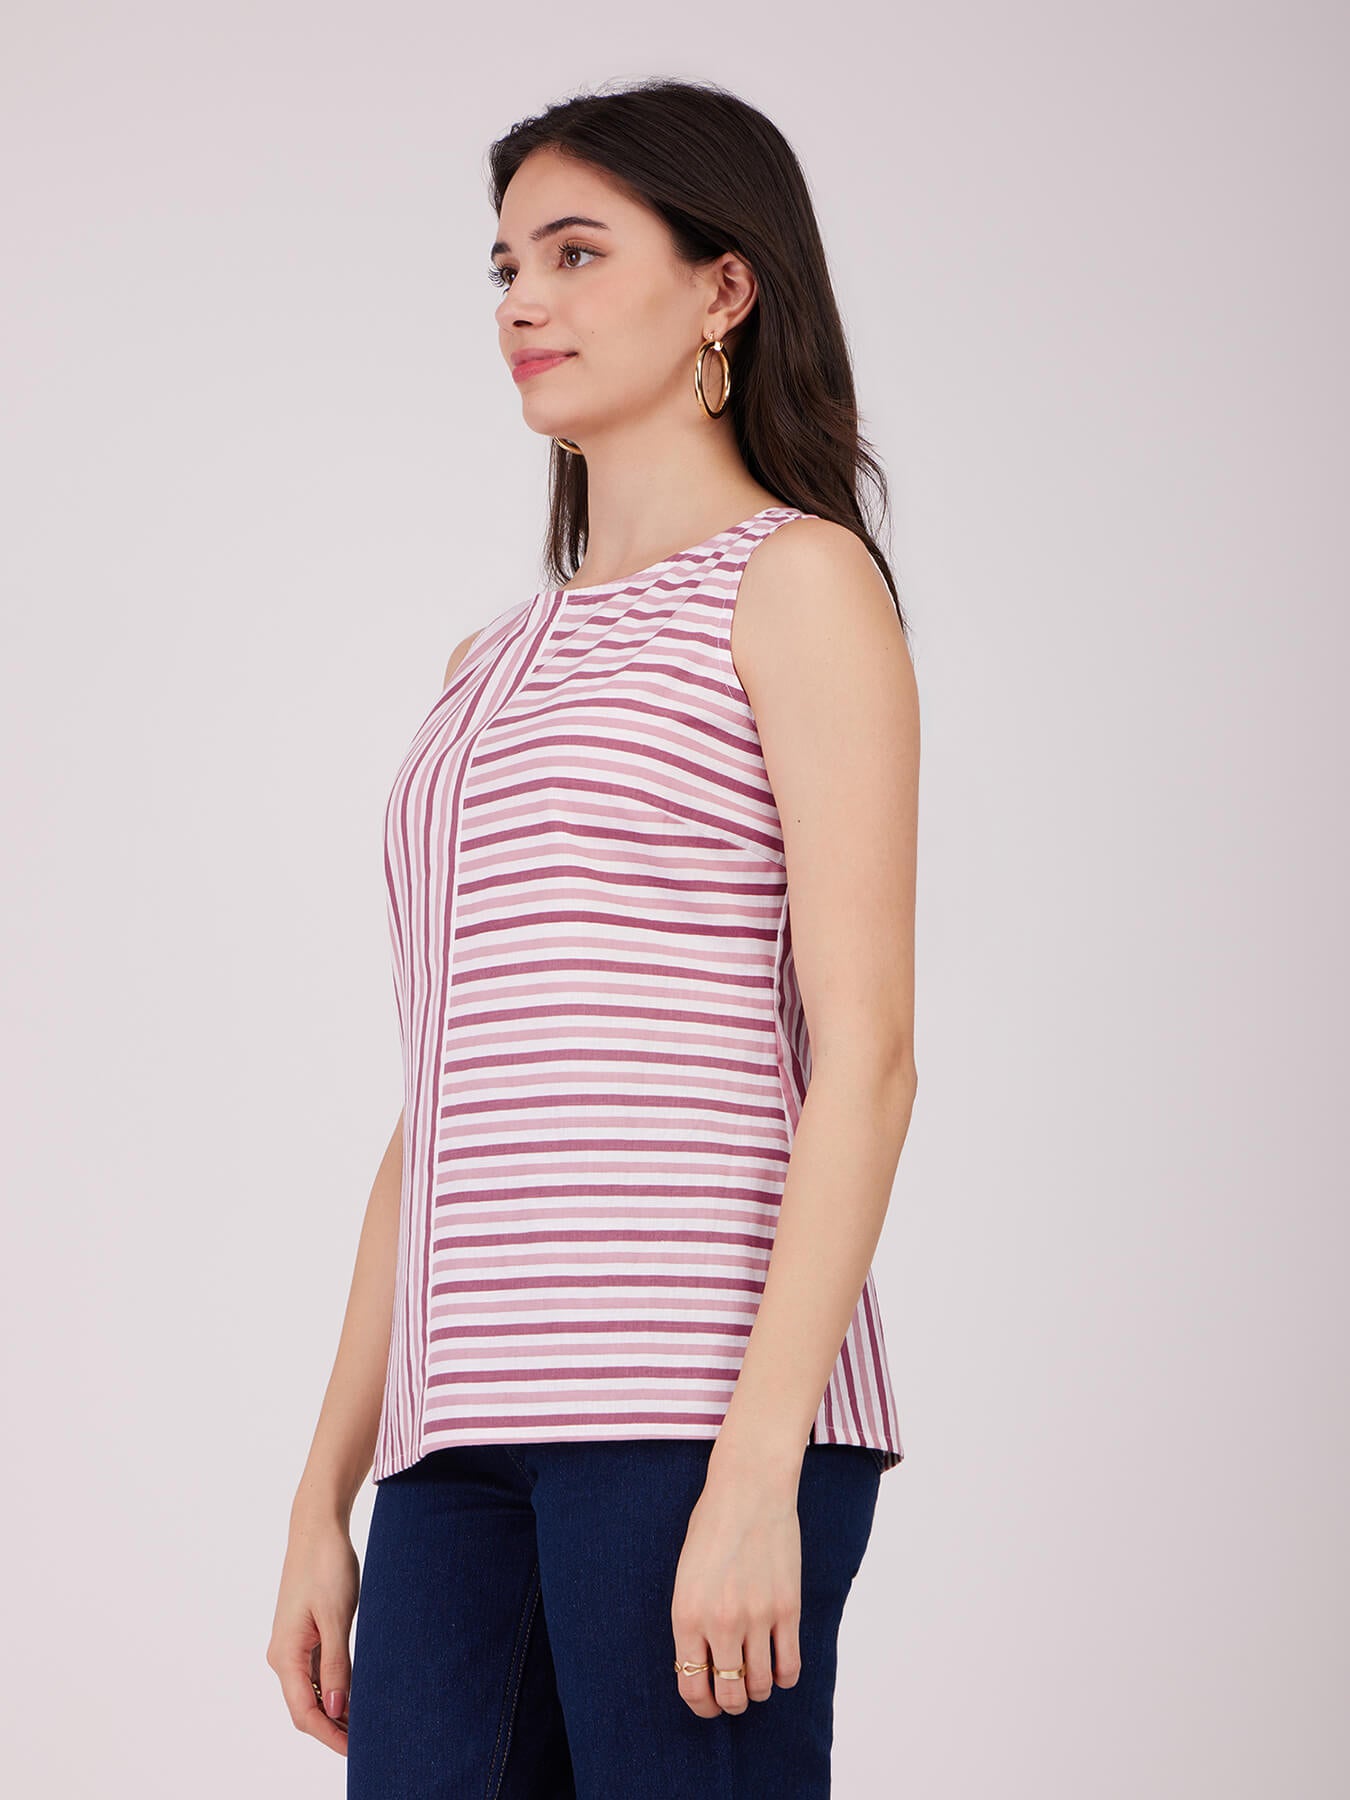 Cotton Striped Top - Pink